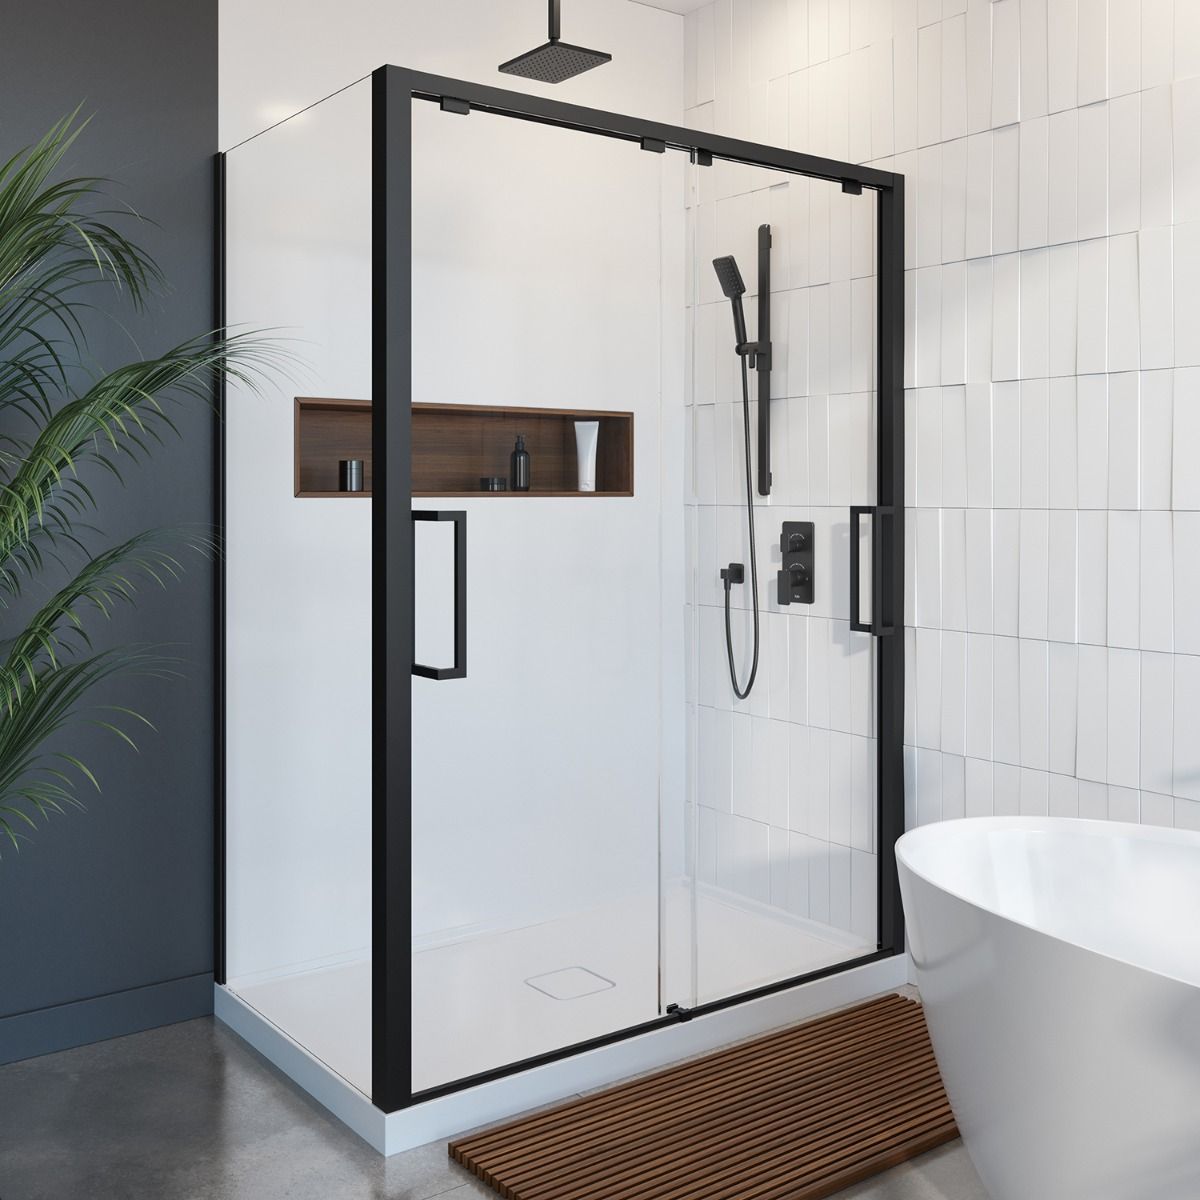 Kalia - Kareo TD2 (Valve Not Included) : Aquatonik T/P With Diverter Shower System With Wallarm - Matte Black